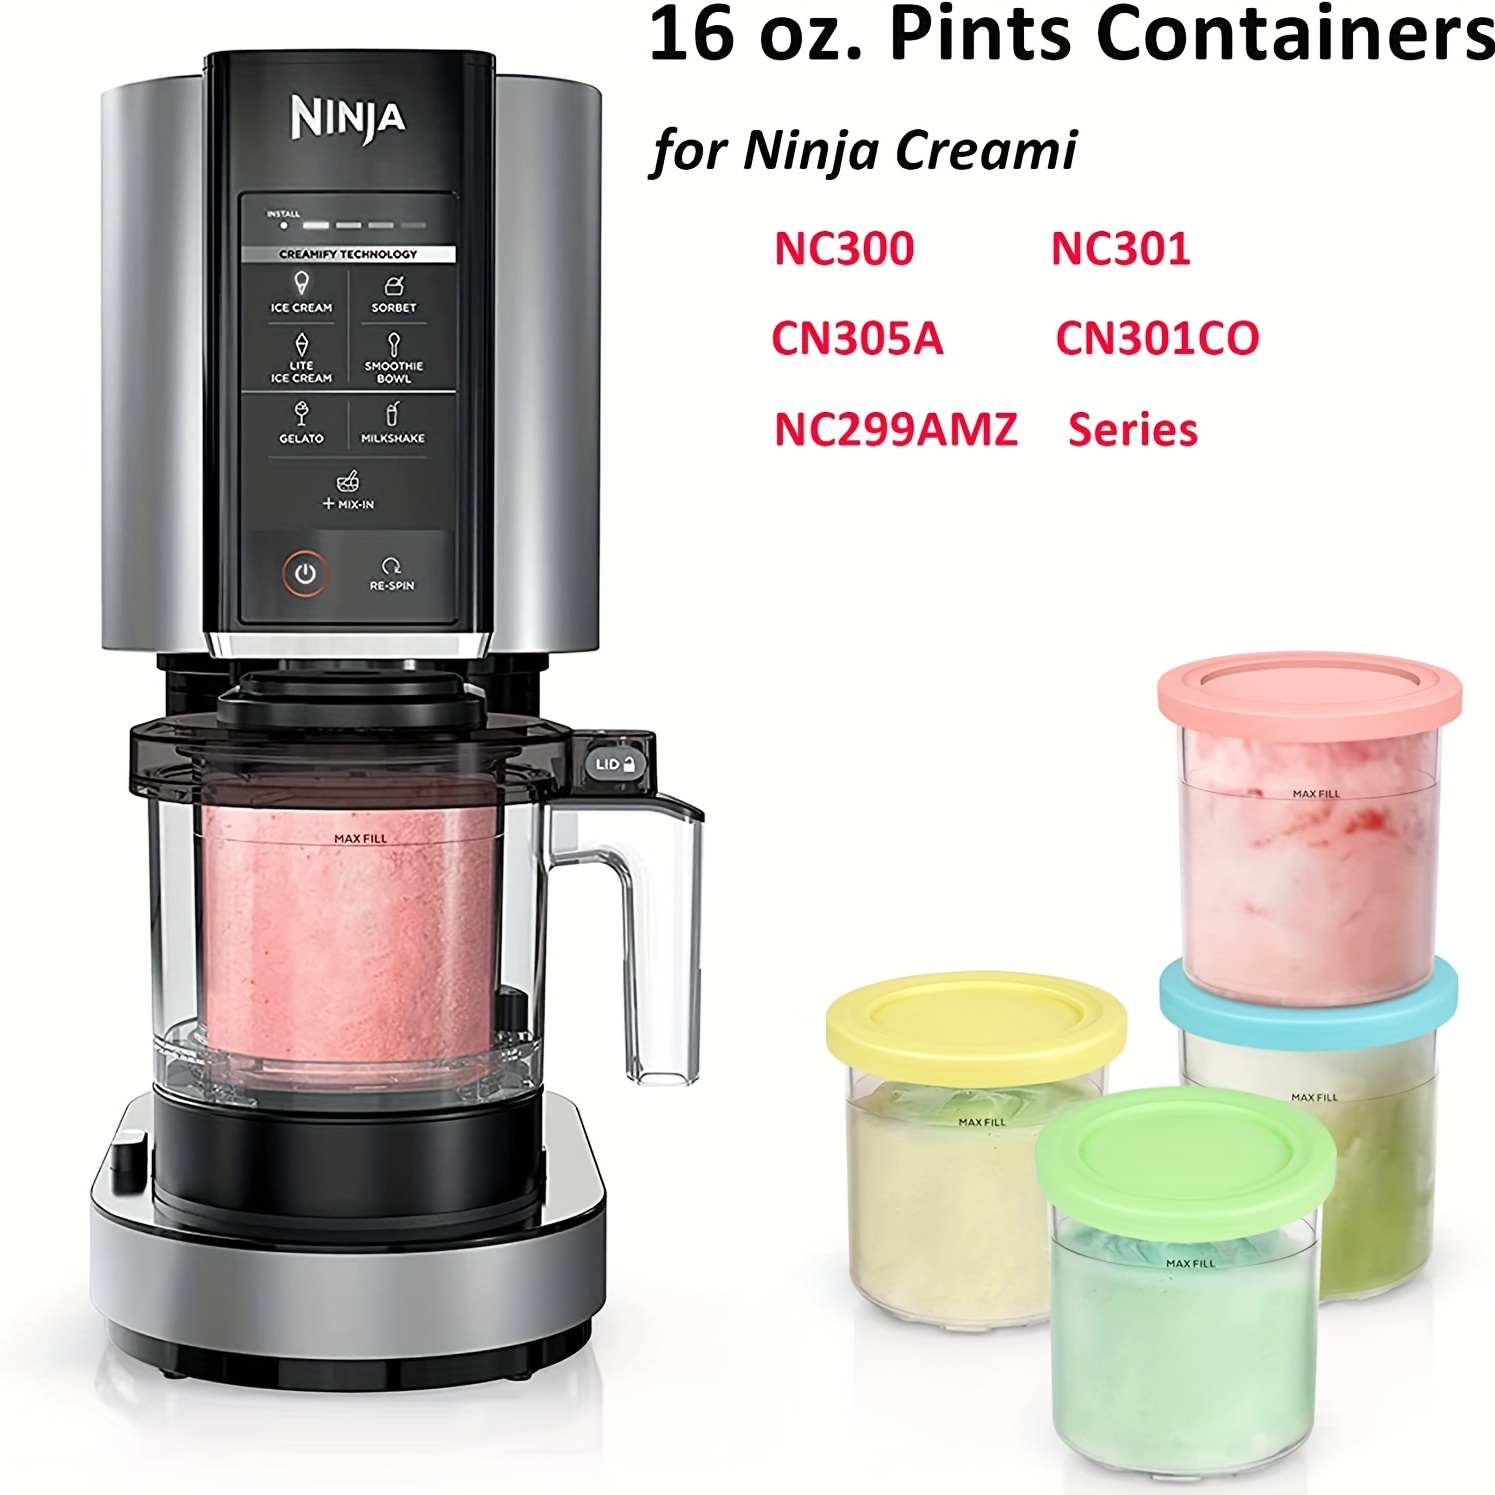  Ice Cream Containers for Ninja Creami Pint Containers